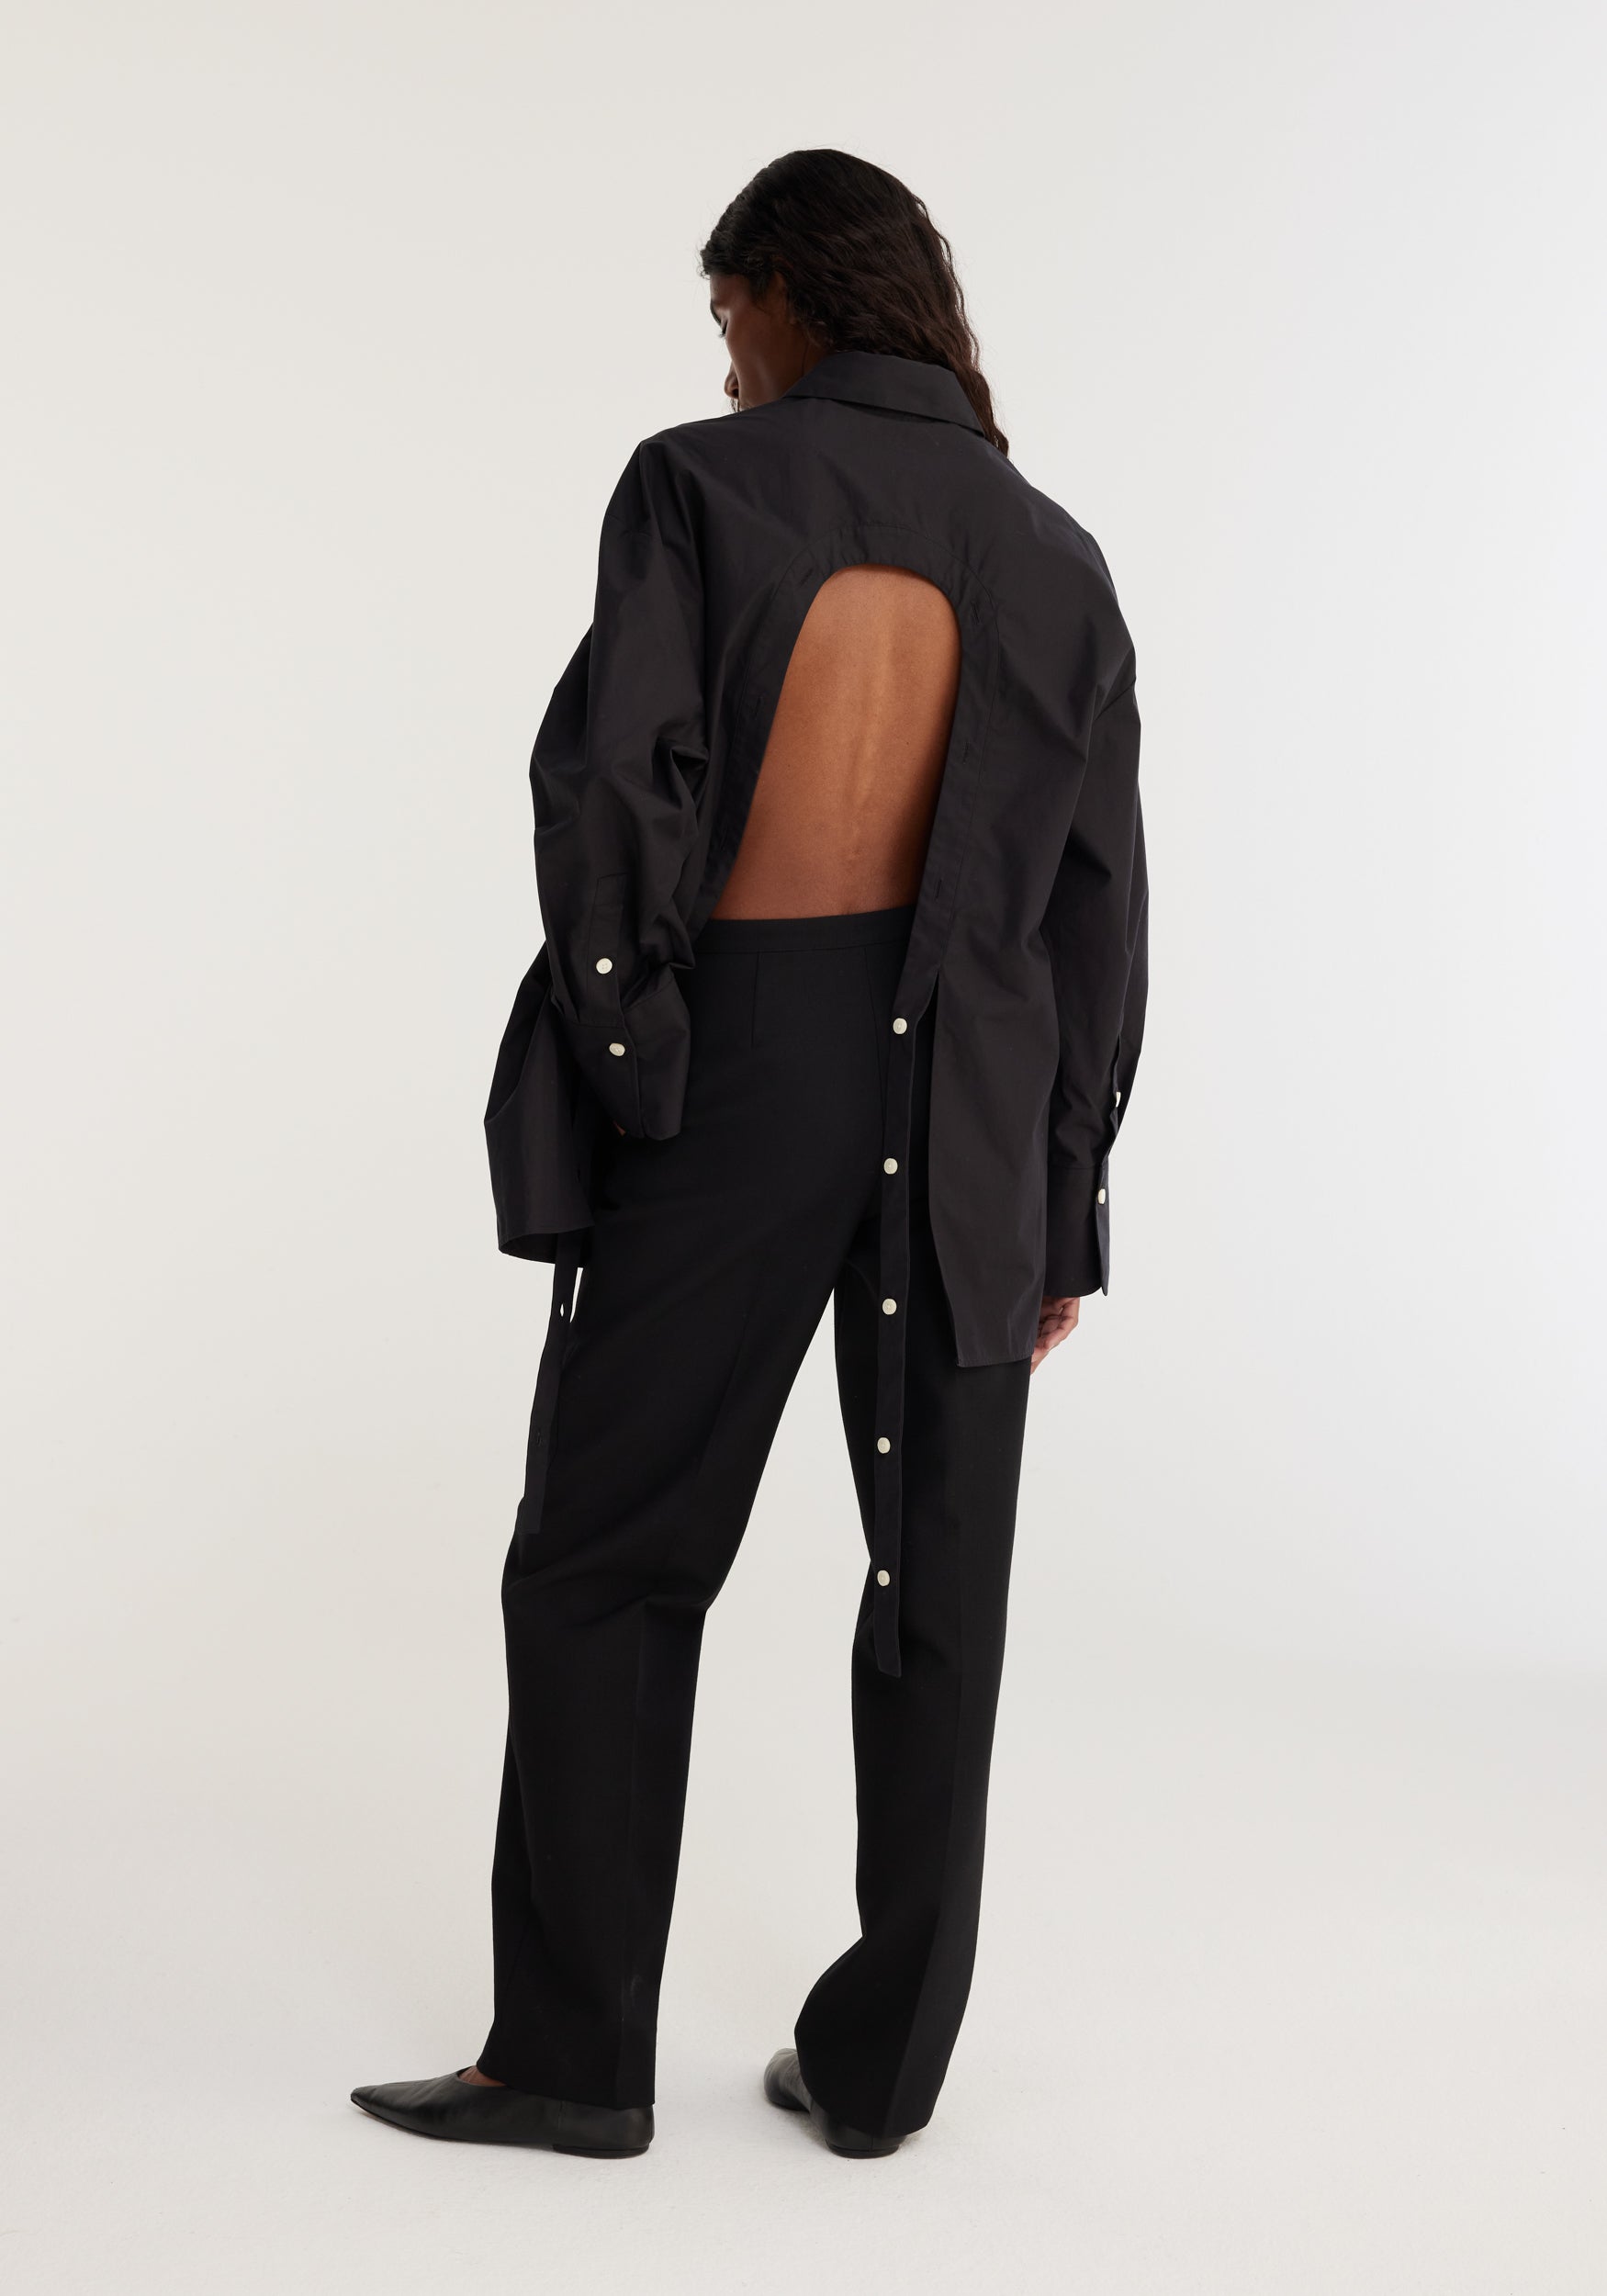 The Rohe Open Back Shirt in Noir available at The New Trend Australia